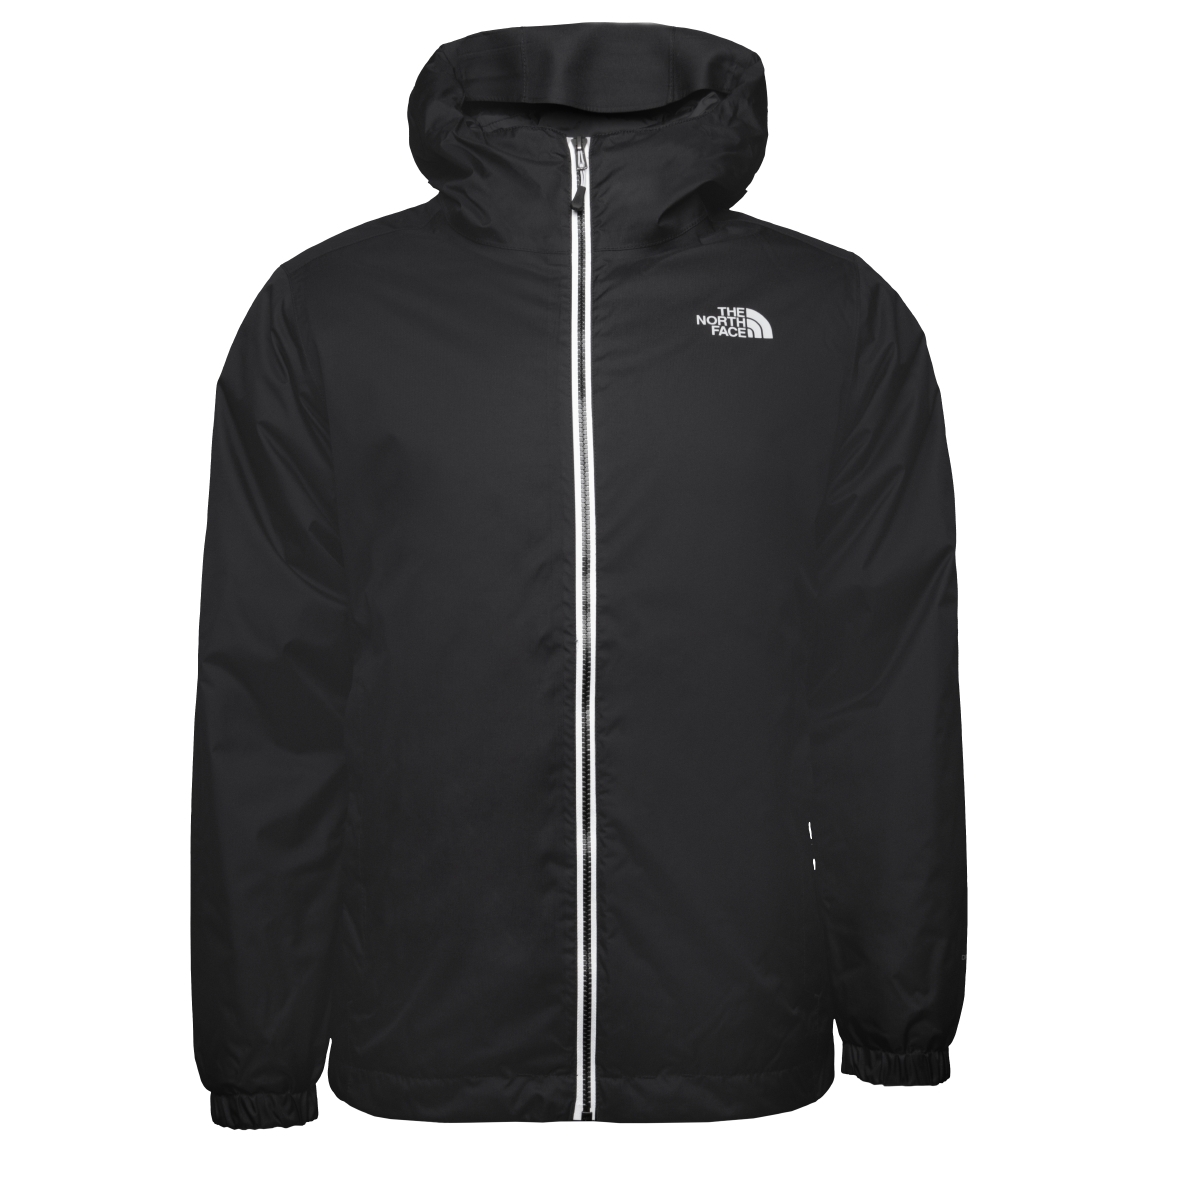 The North Face Quest Insulated Funktionsjacke schwarz